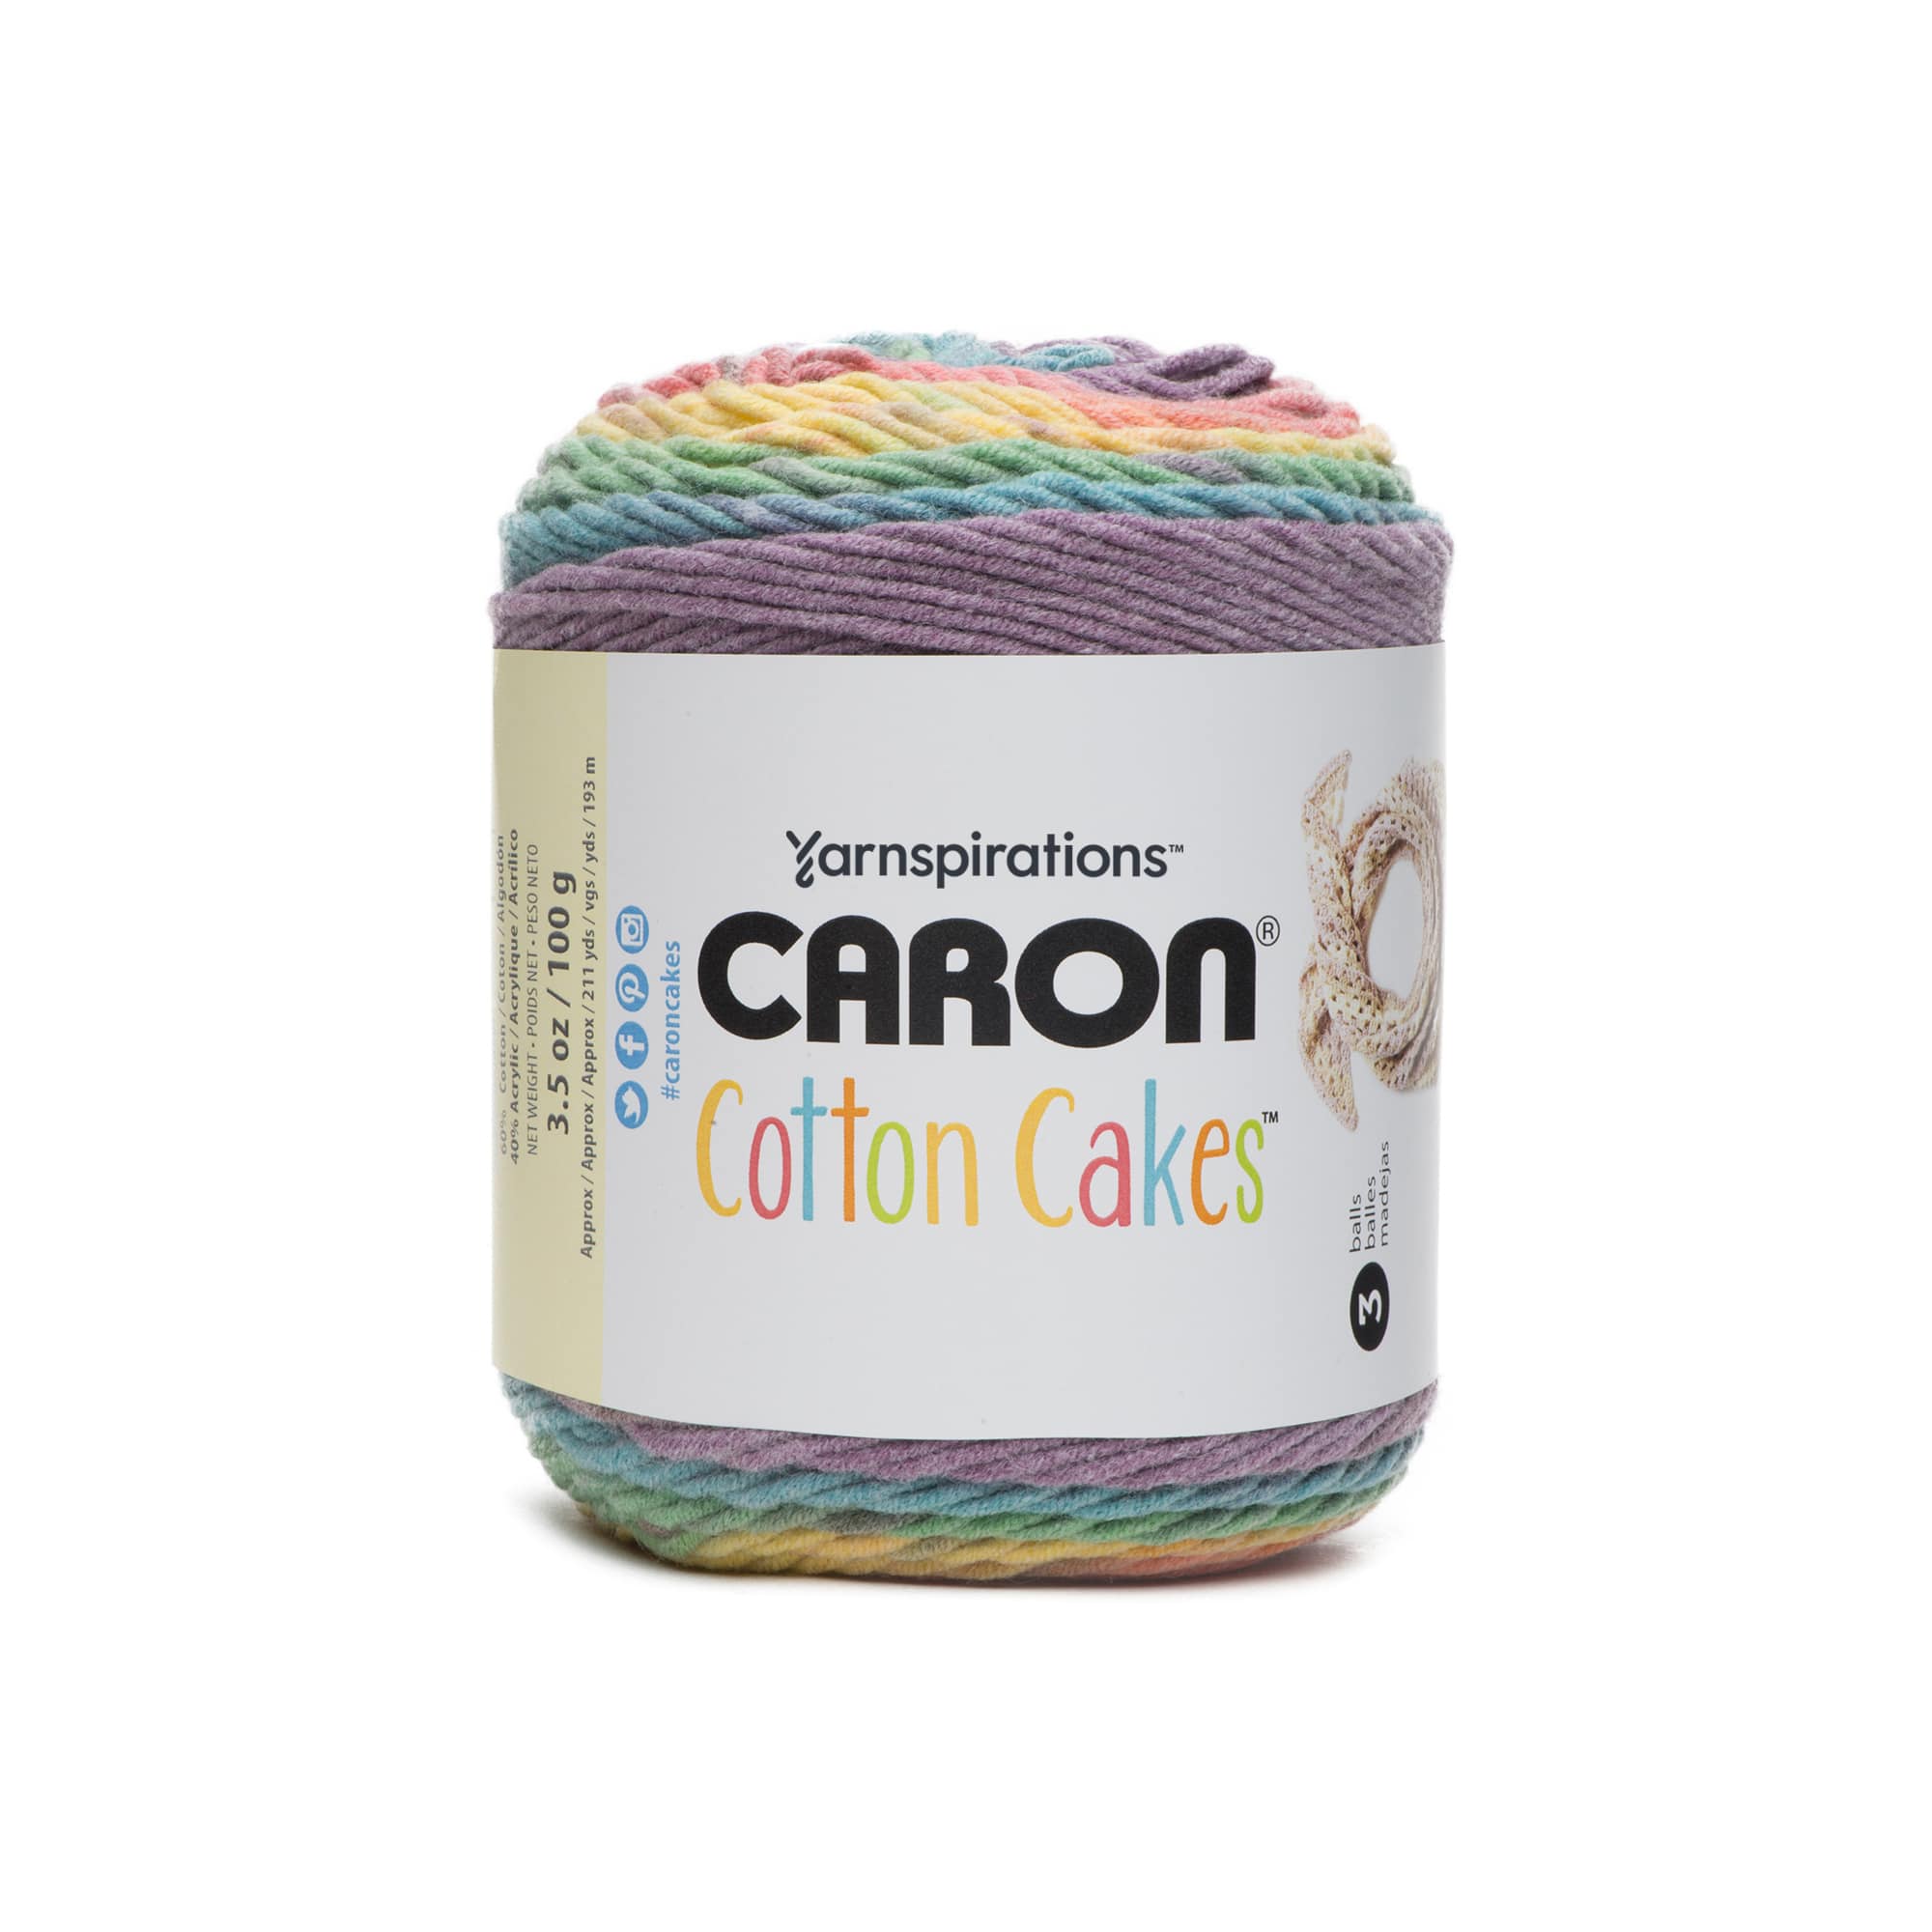 Lot of 3 Lion Brand JIFFY Yarn EL PASO Variegated 325 Multicolor Cat 5  Bulky Chunky Acrylic Yarn Skein Discontinued Rare Knitting Crochet -   Canada